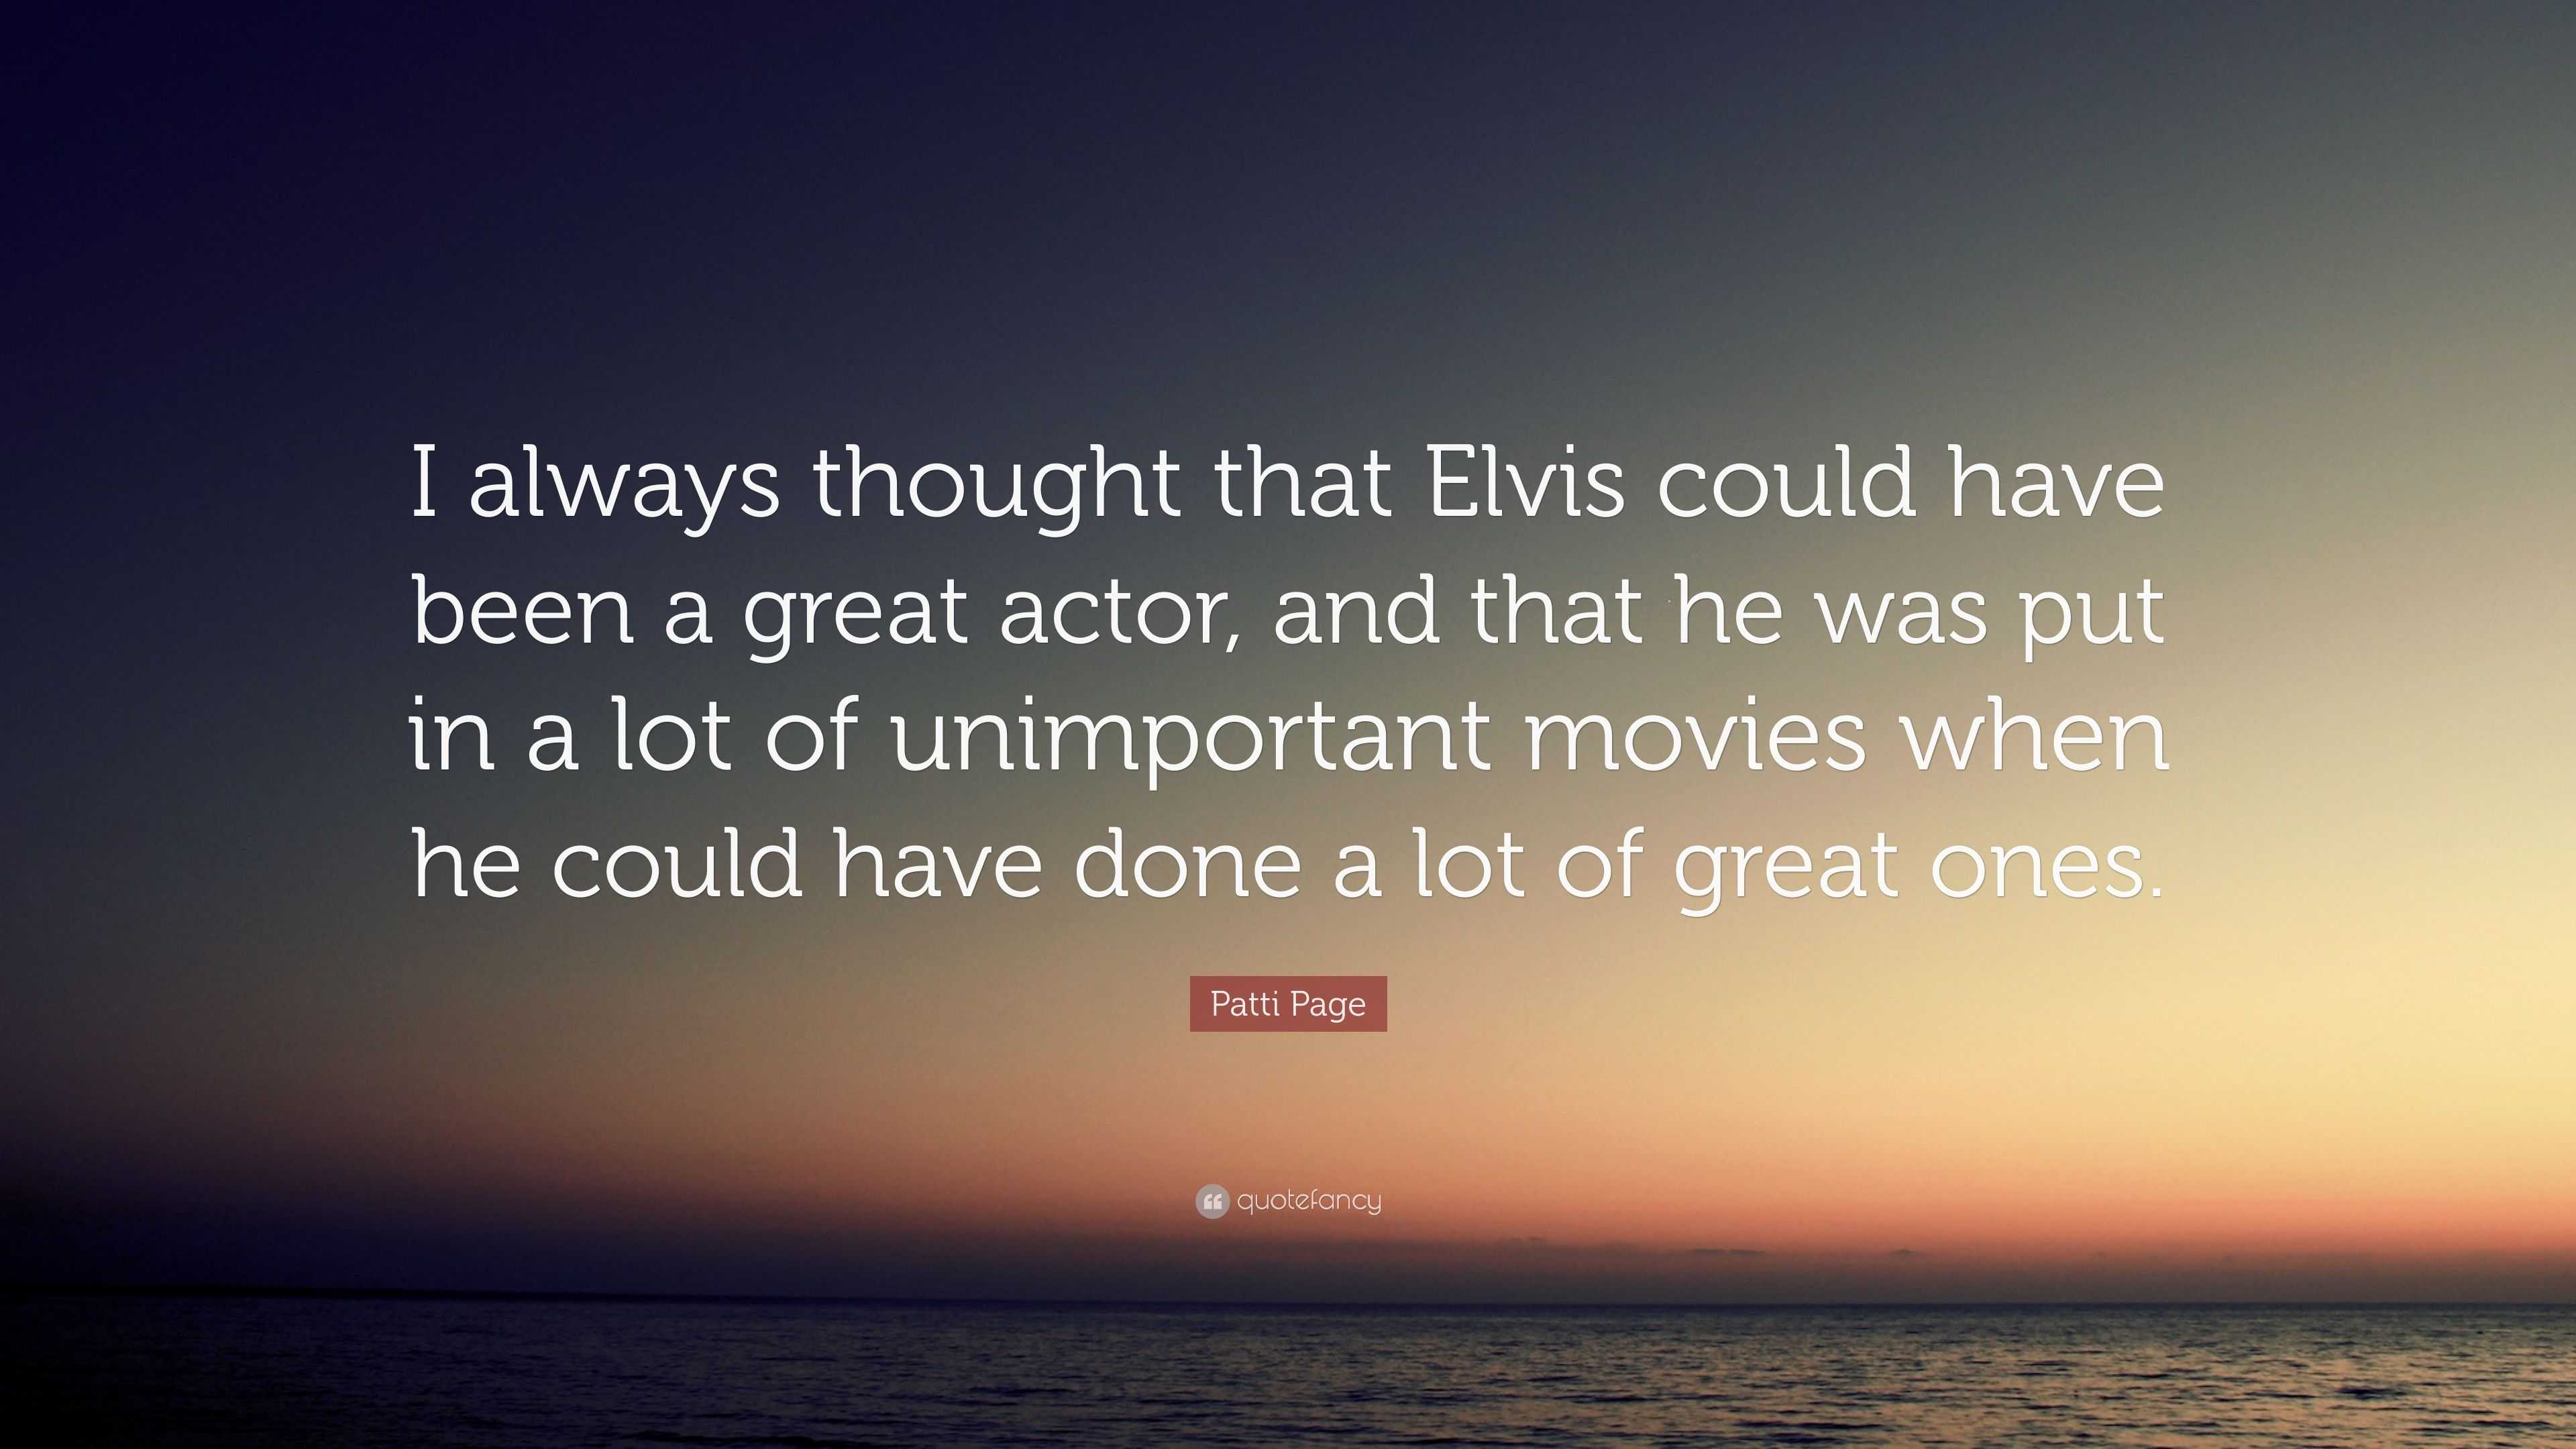 Patti Page Quote: “I always thought that Elvis could have been a great ...